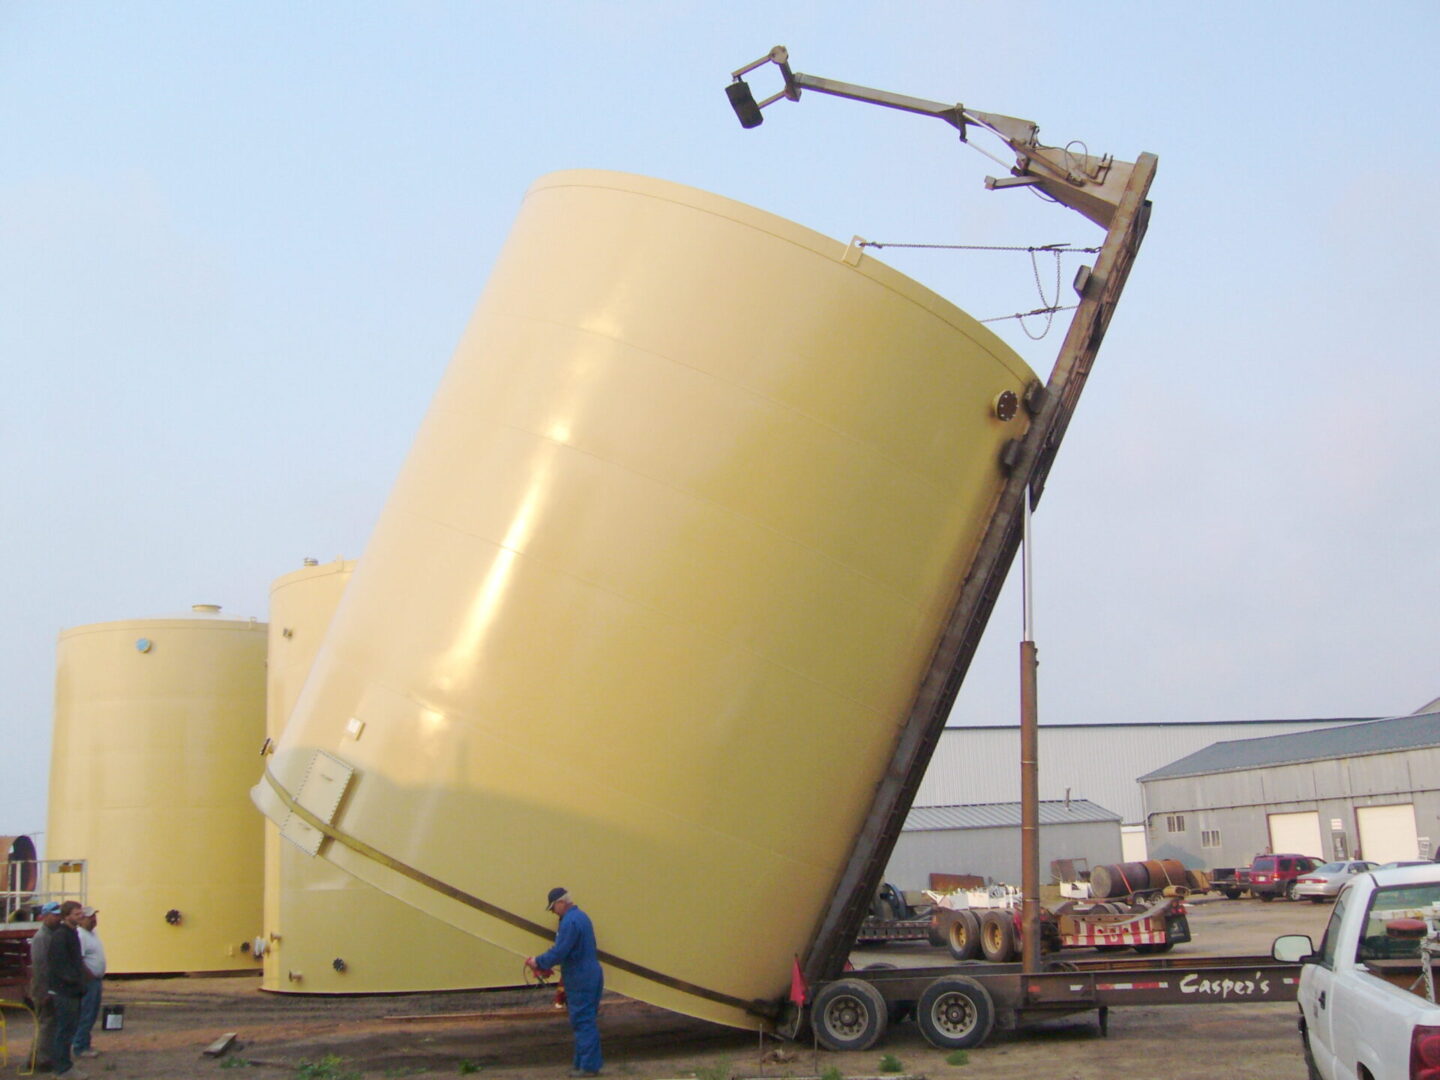 A large yellow tank being lifted onto a truck.